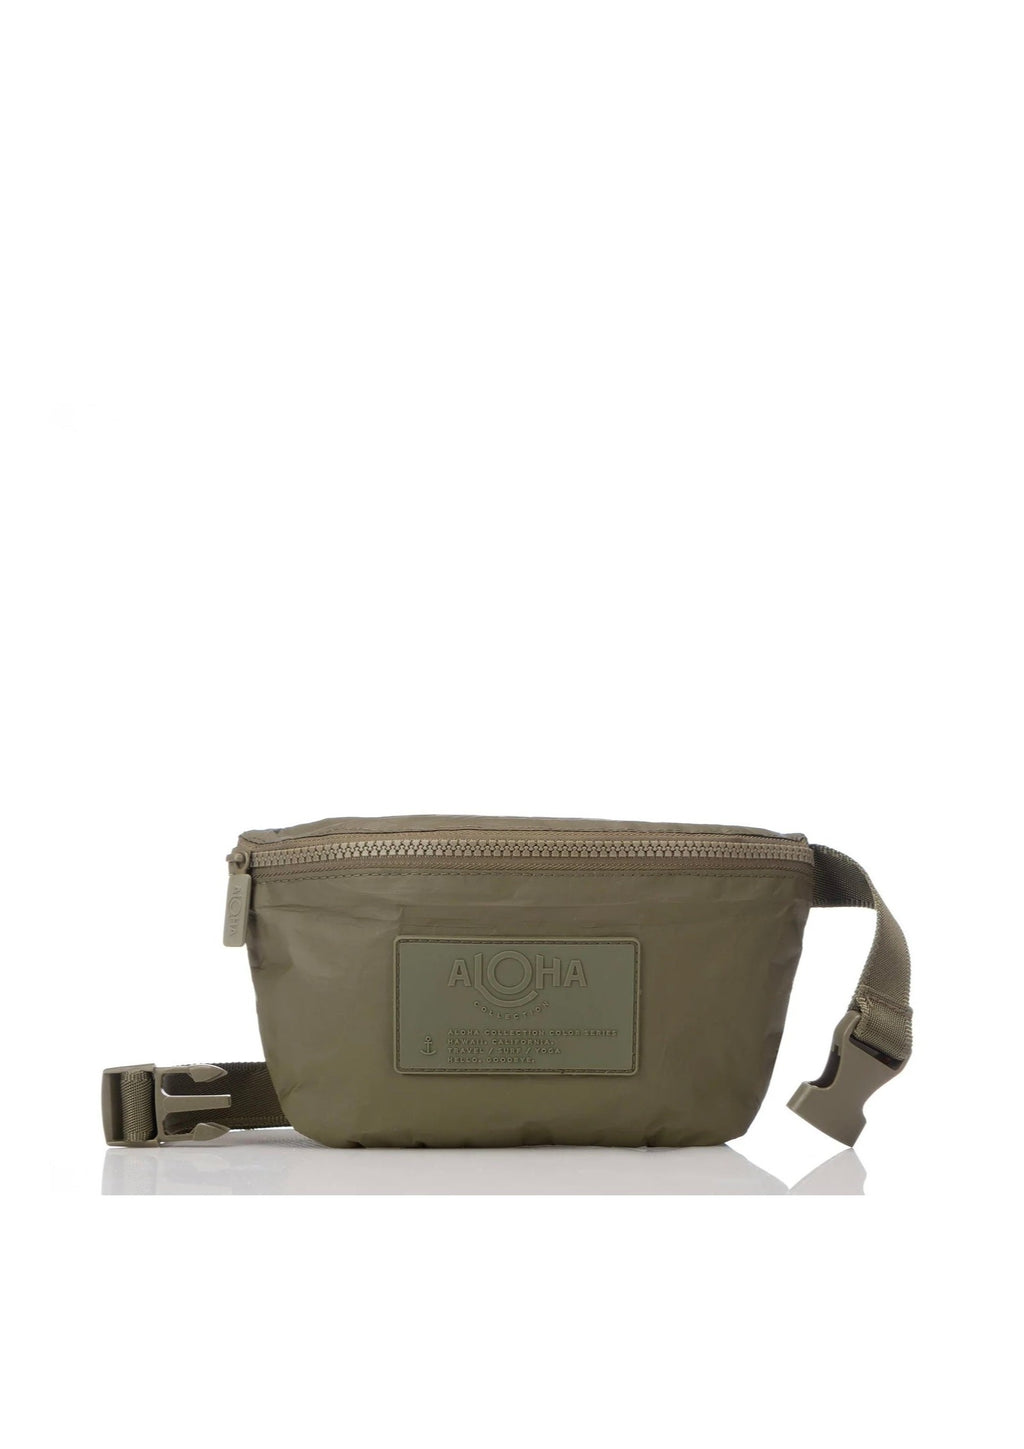 Aloha Mini Hip Pack - Monochrome Olive Take your look from beach to street with a new classic! Elevate your style with sleek monochrome silhouettes in timeless hues.